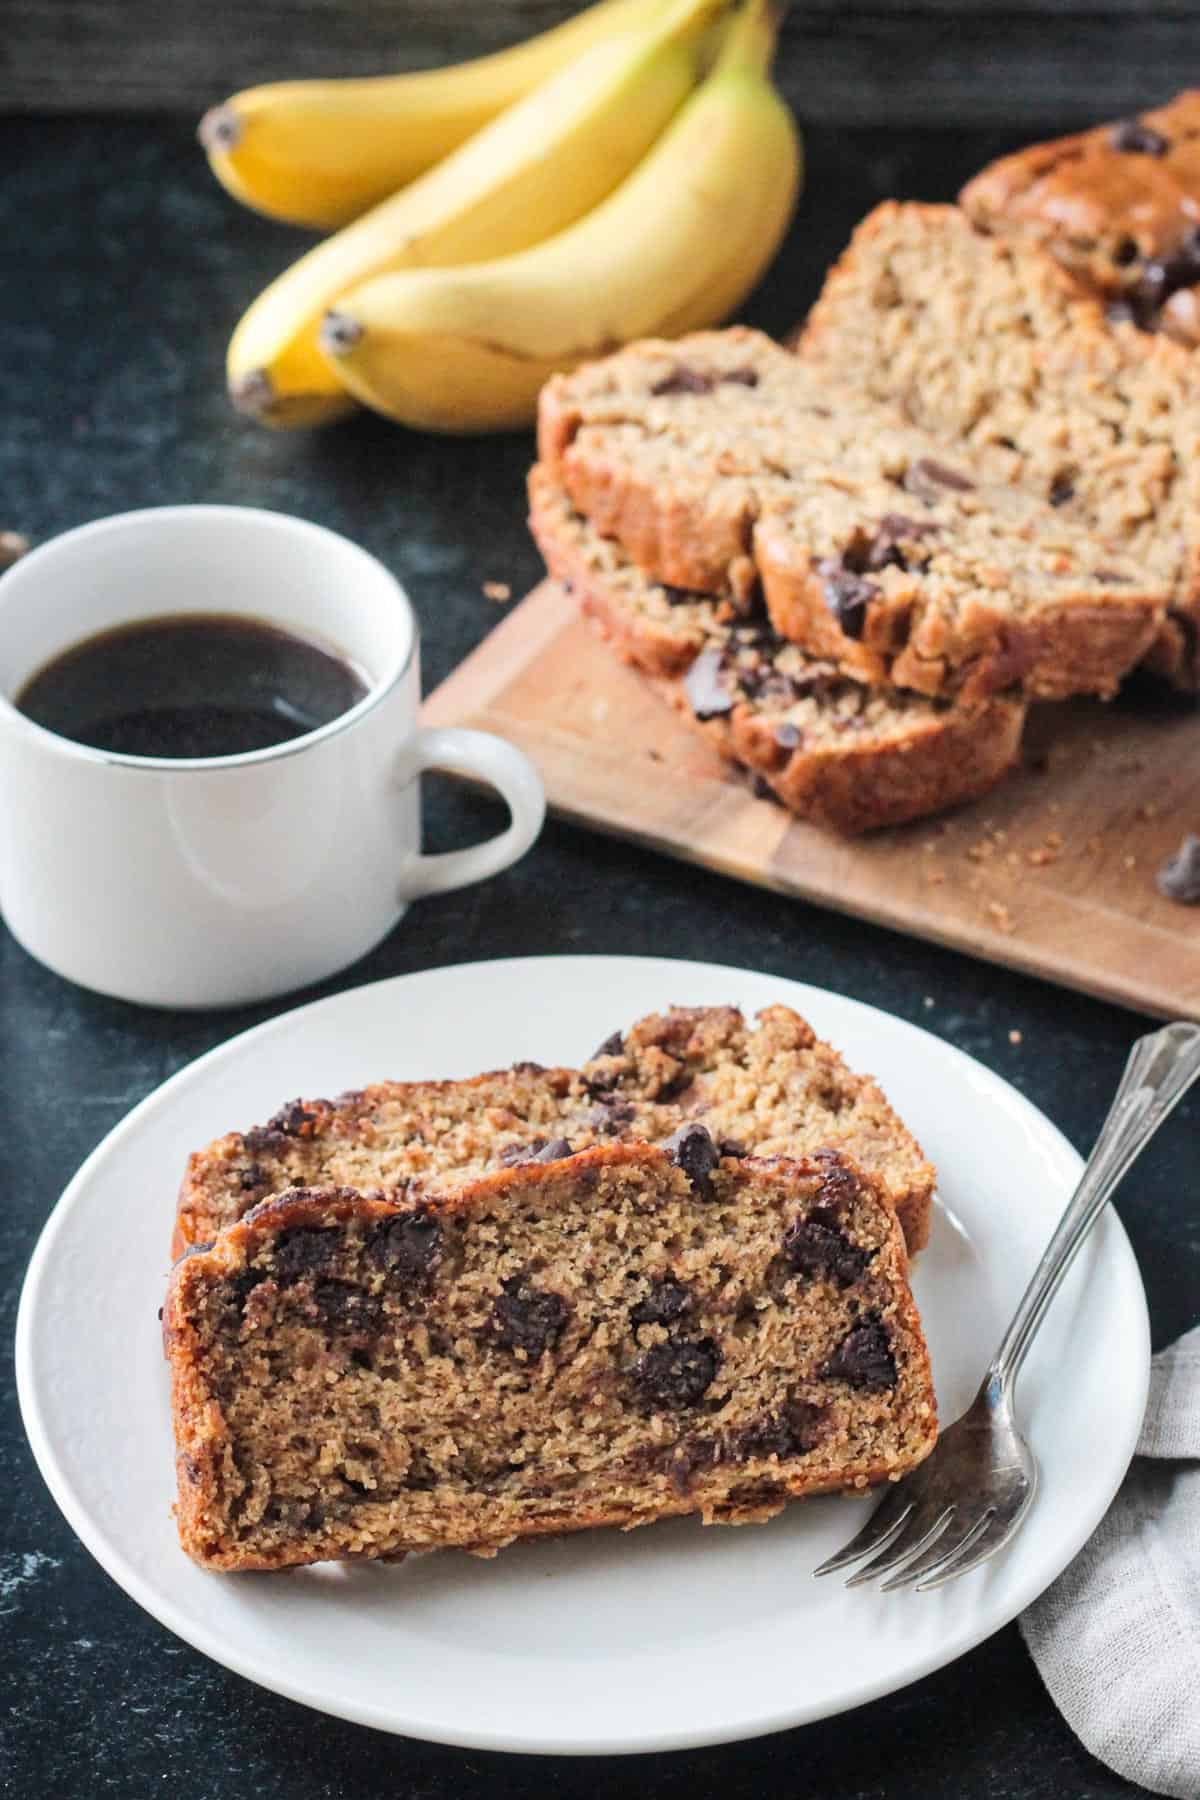 Two slices of peanut butter banana bread on a plate in front of the rest of the loaf on a tray.